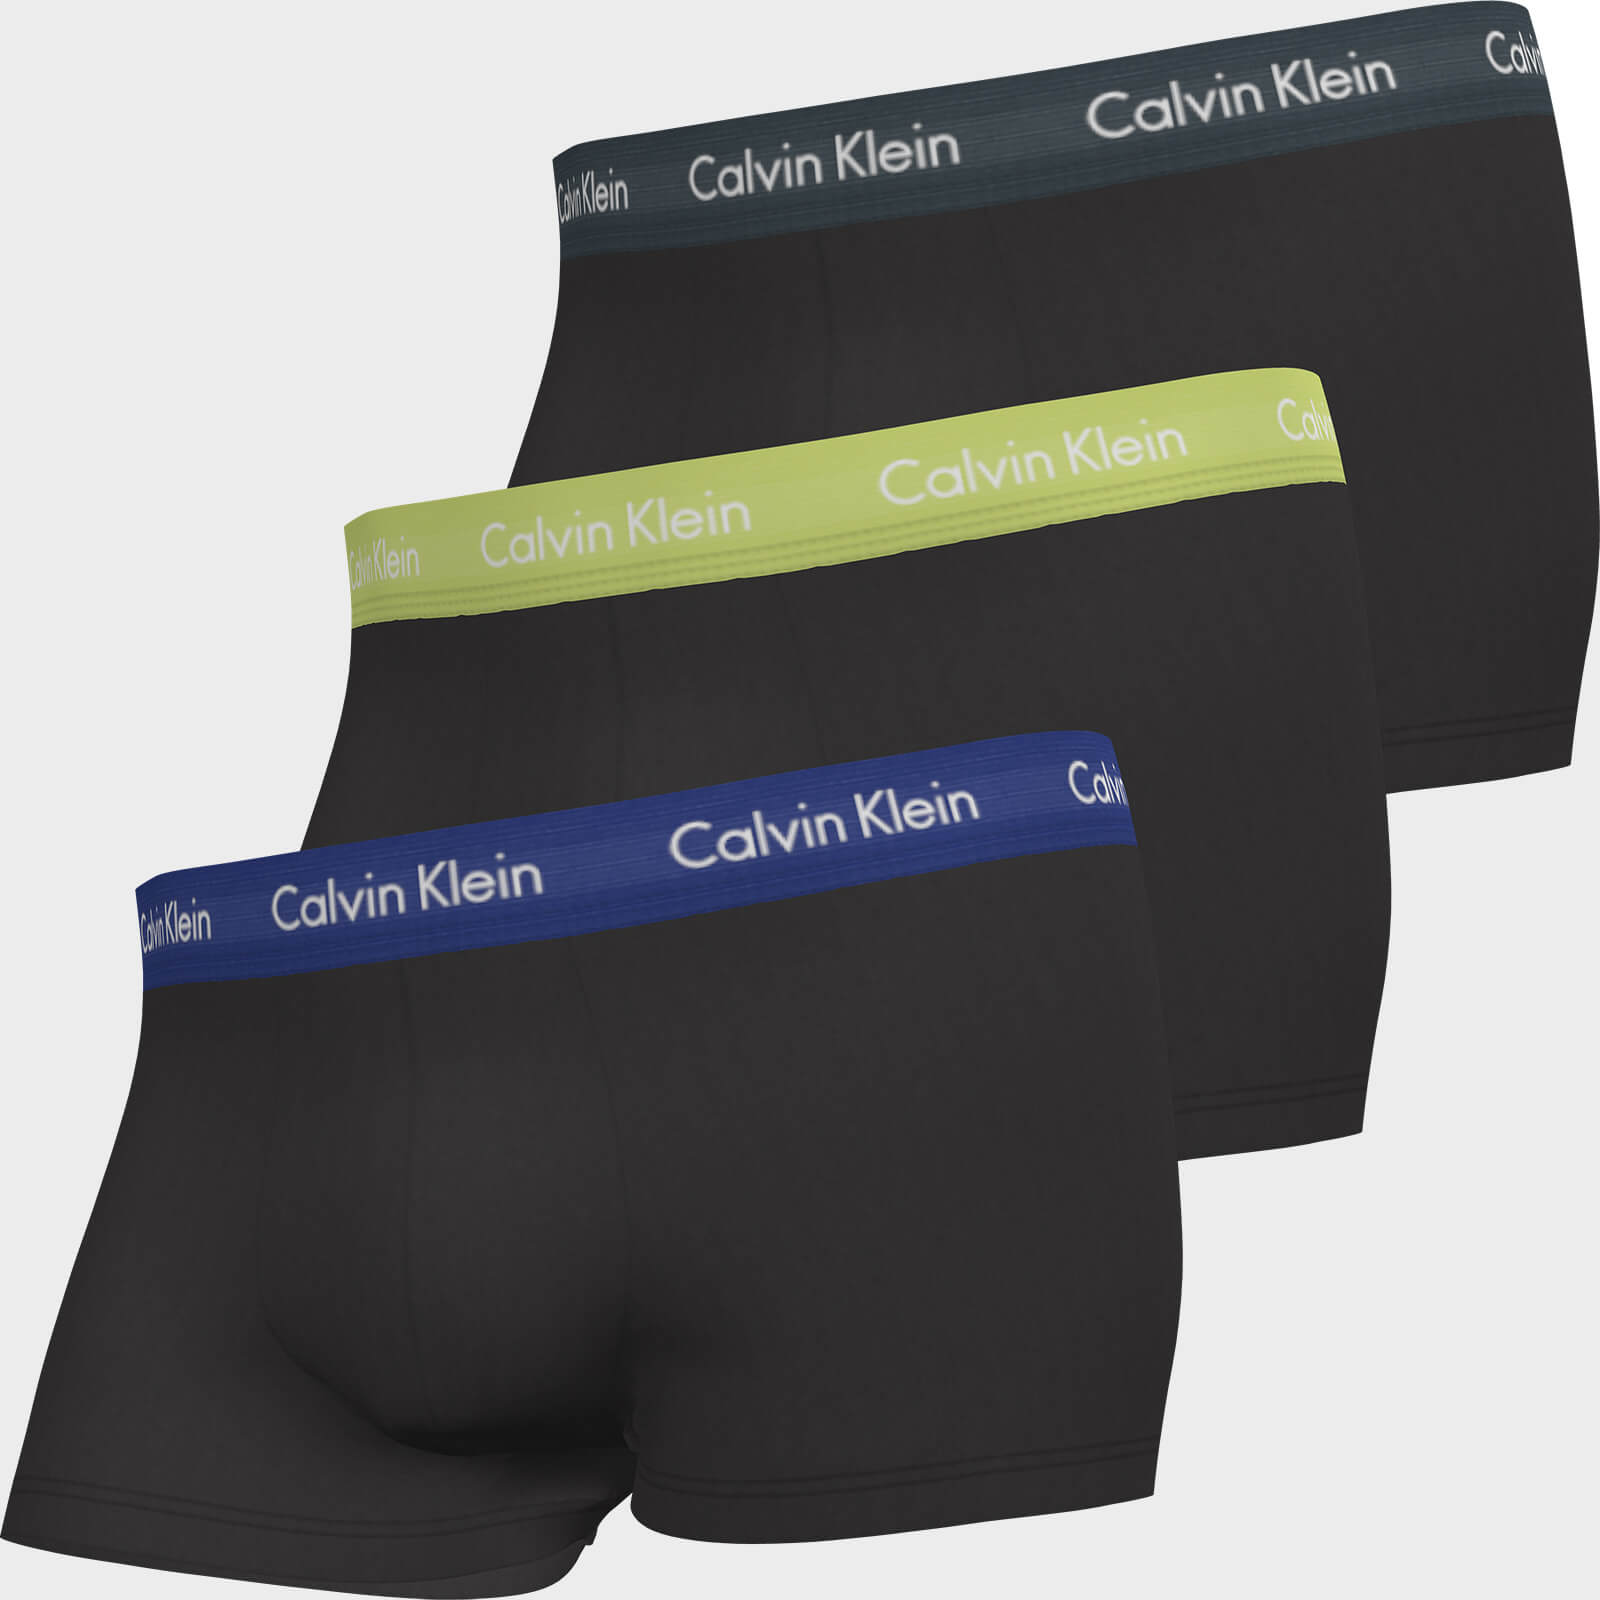 Calvin Klein Men's Cotton Stretch Low Rise 3 Pack Trunks with Contrast Waistband - B-Hemisphere/Direct Green/Blue Flan - S